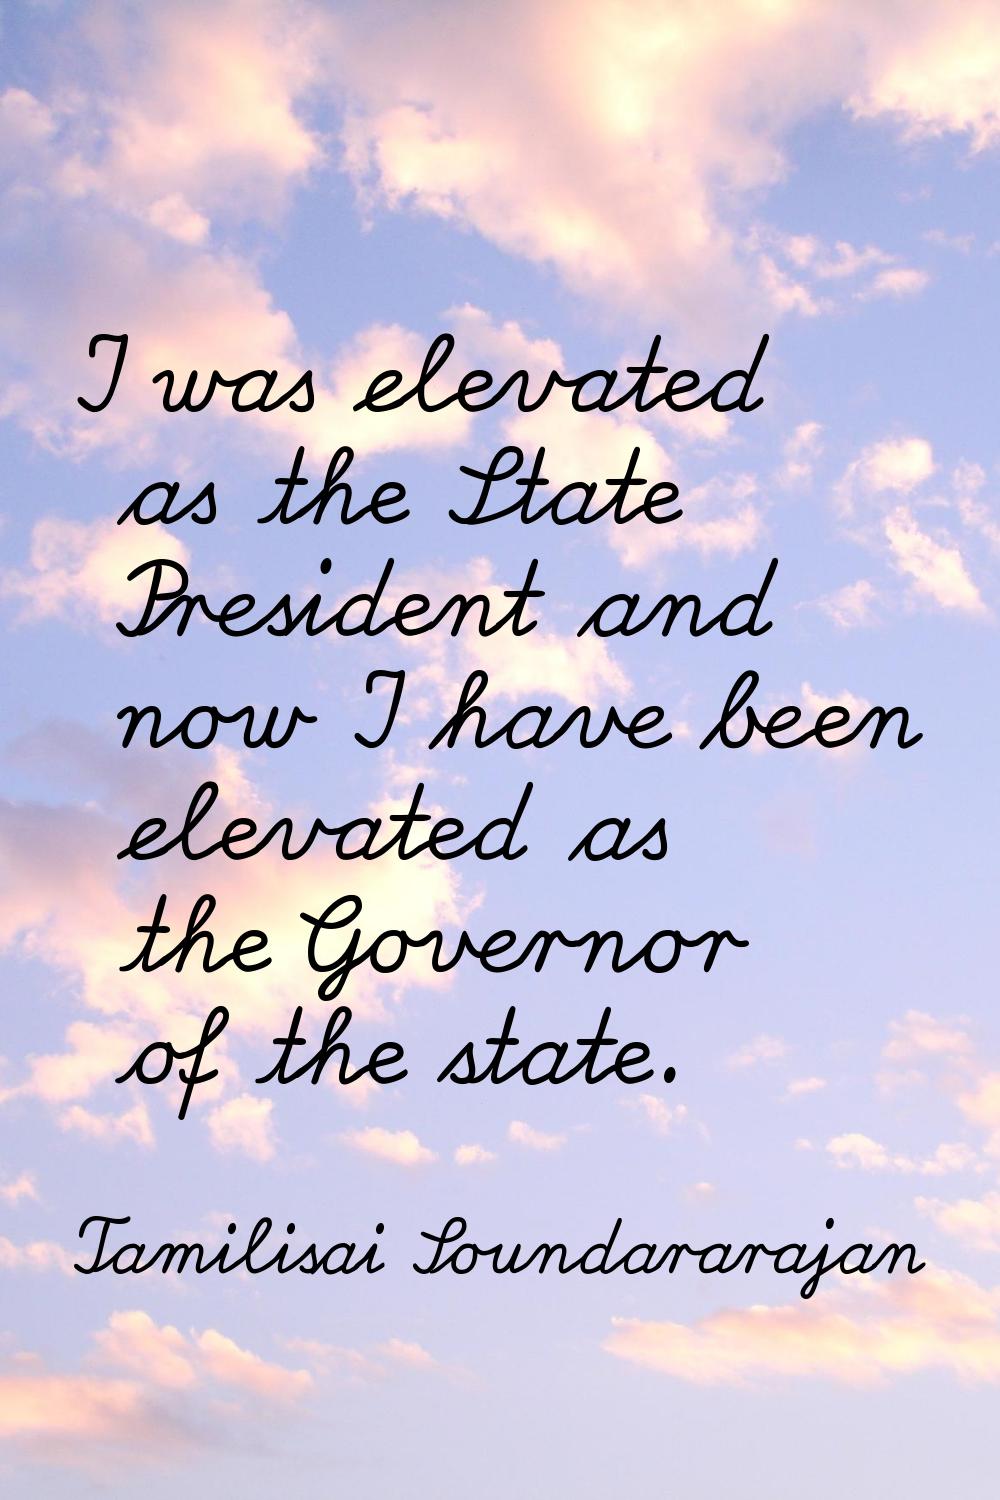 I was elevated as the State President and now I have been elevated as the Governor of the state.